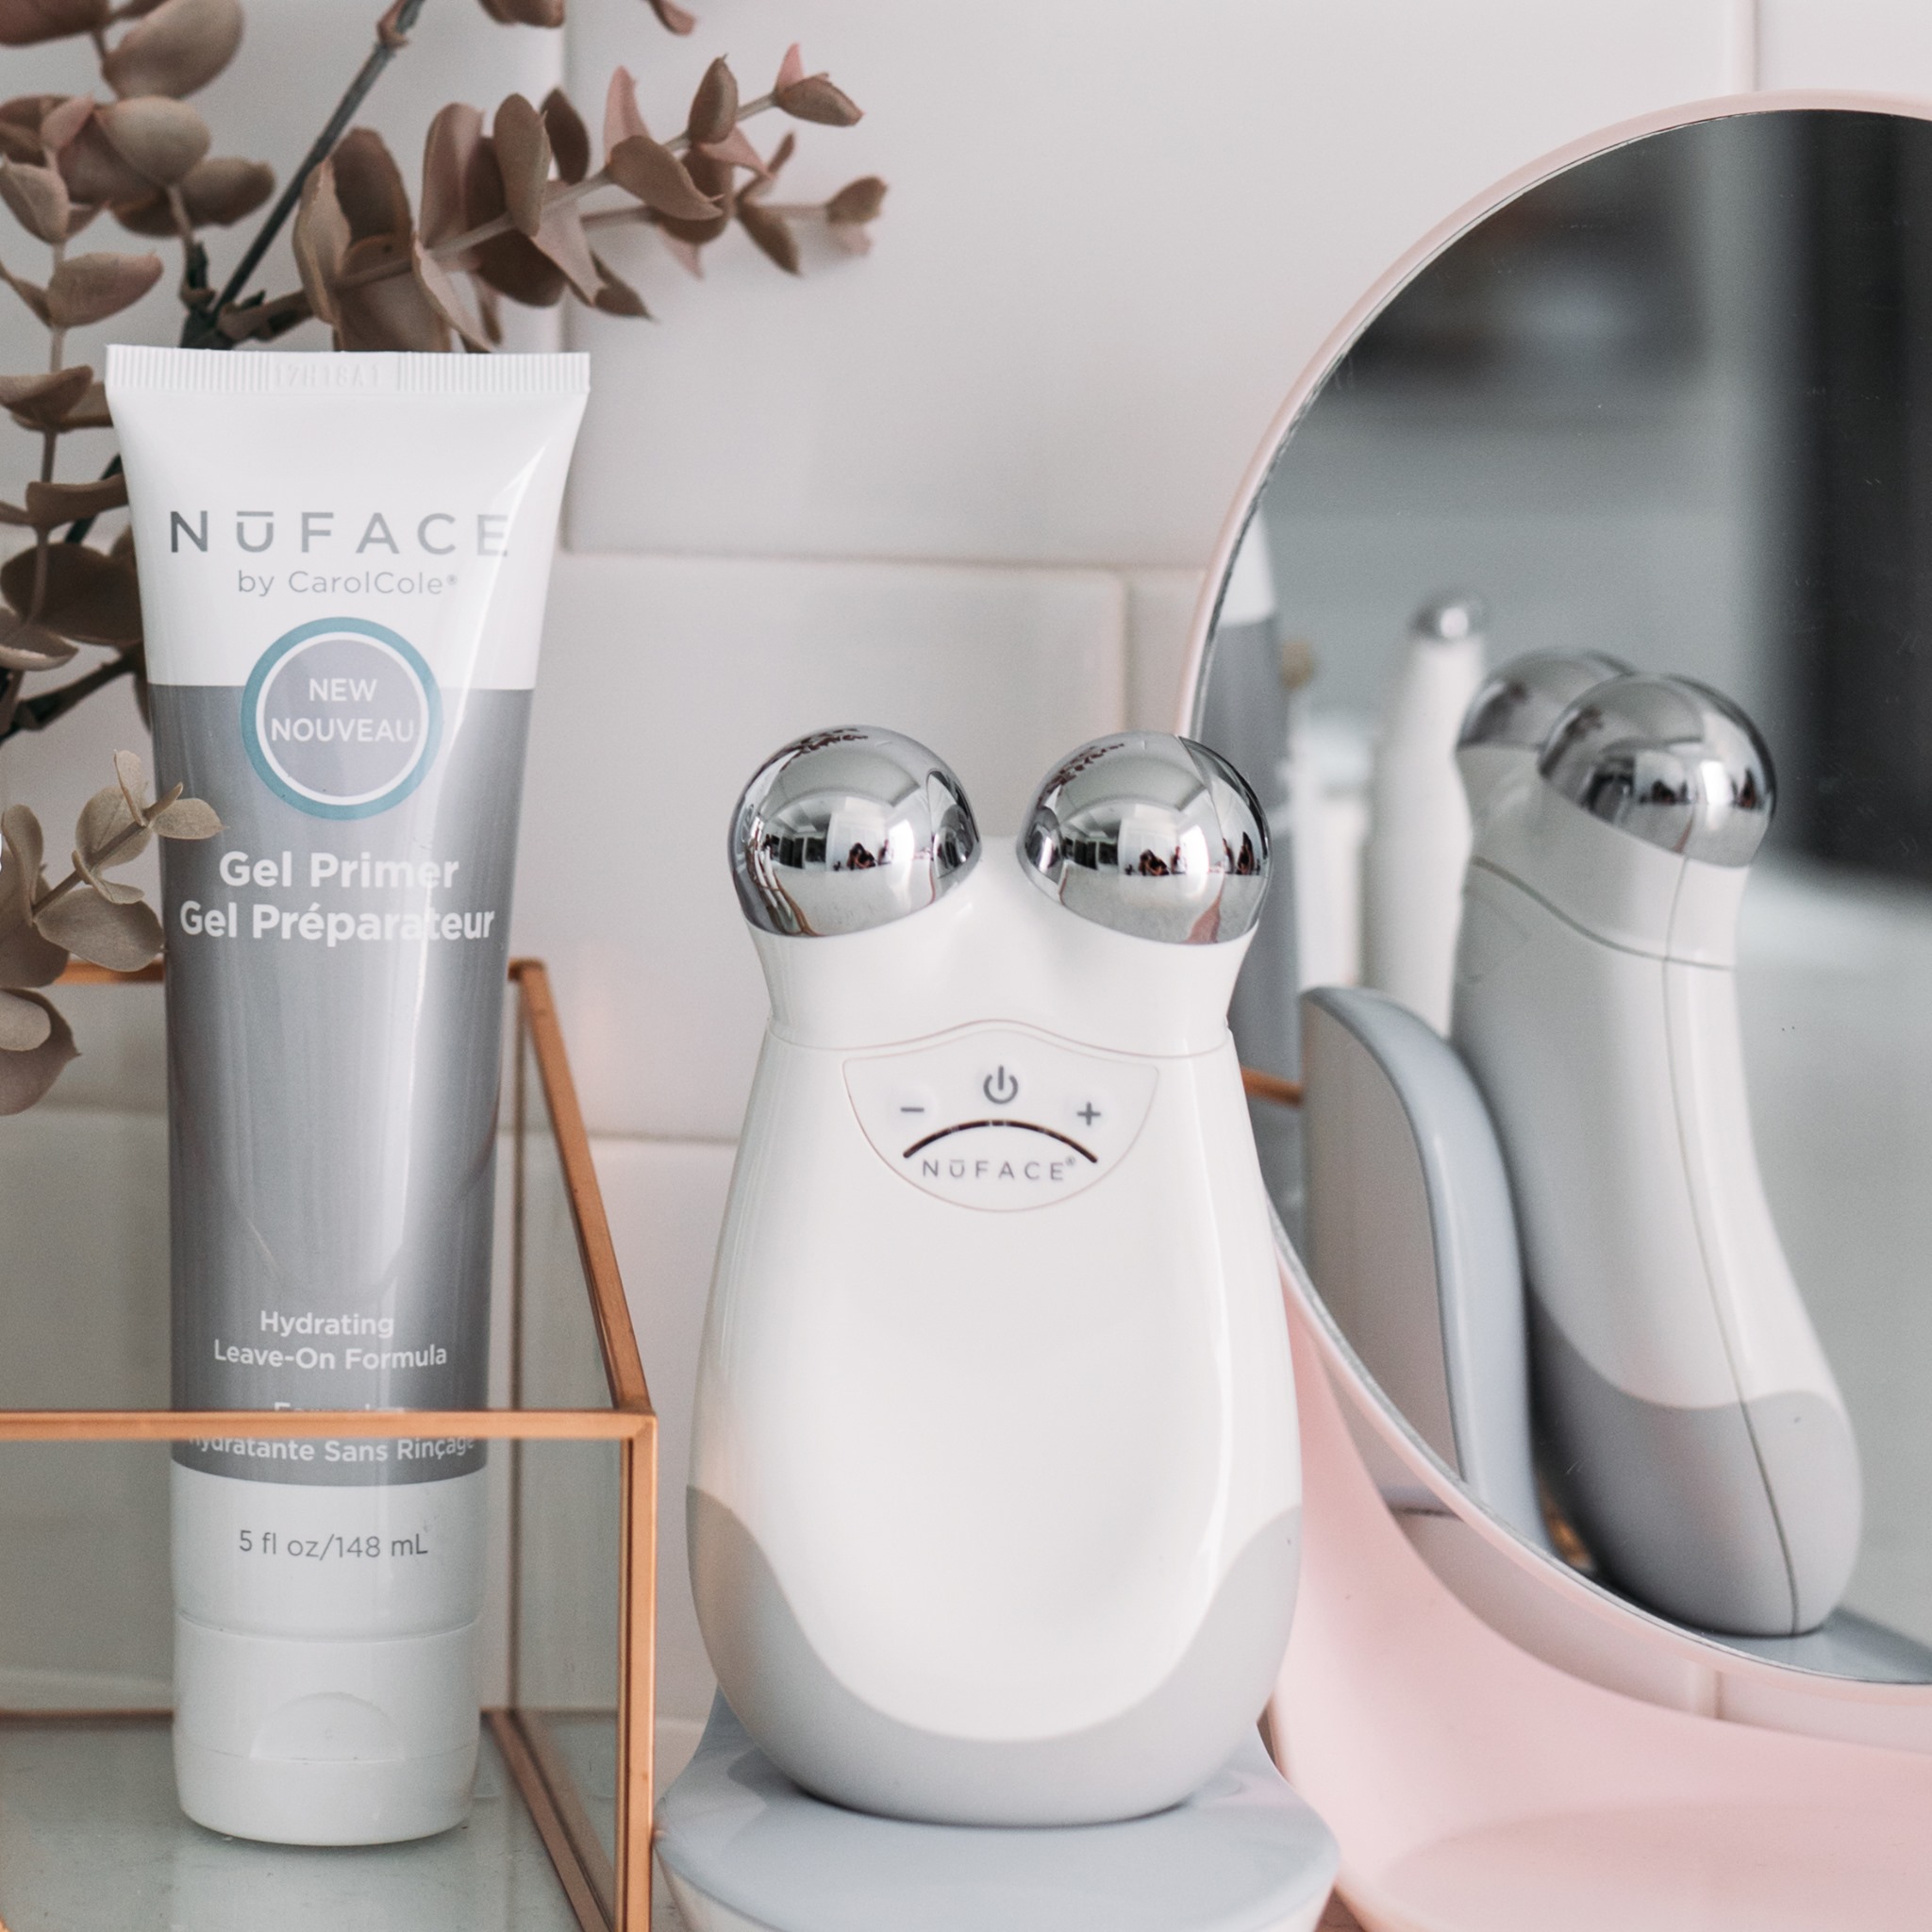 【Dreamy Skin Anytime, Anywhere】 Take your anti-ageing regime into your own hands with NuFACE, the award-winning beauty brand that’s been pioneering microcurrent technology and at-home beauty devices since 2005